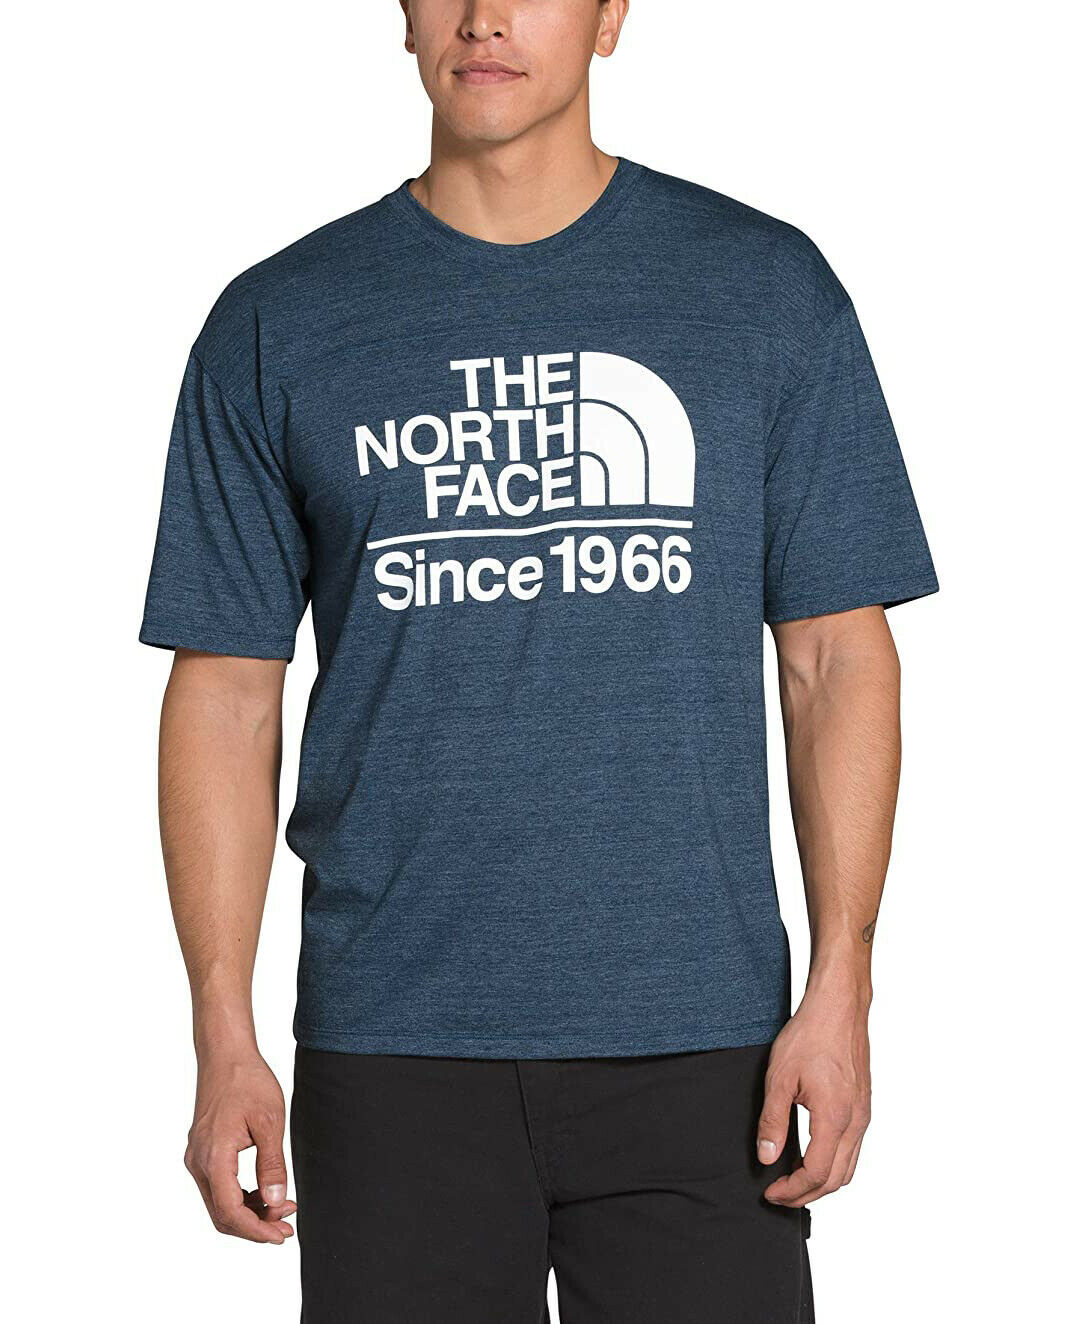 The North Face Men's Field TB Tee, Shady Blue Heather, M 3718-9 - $33.17